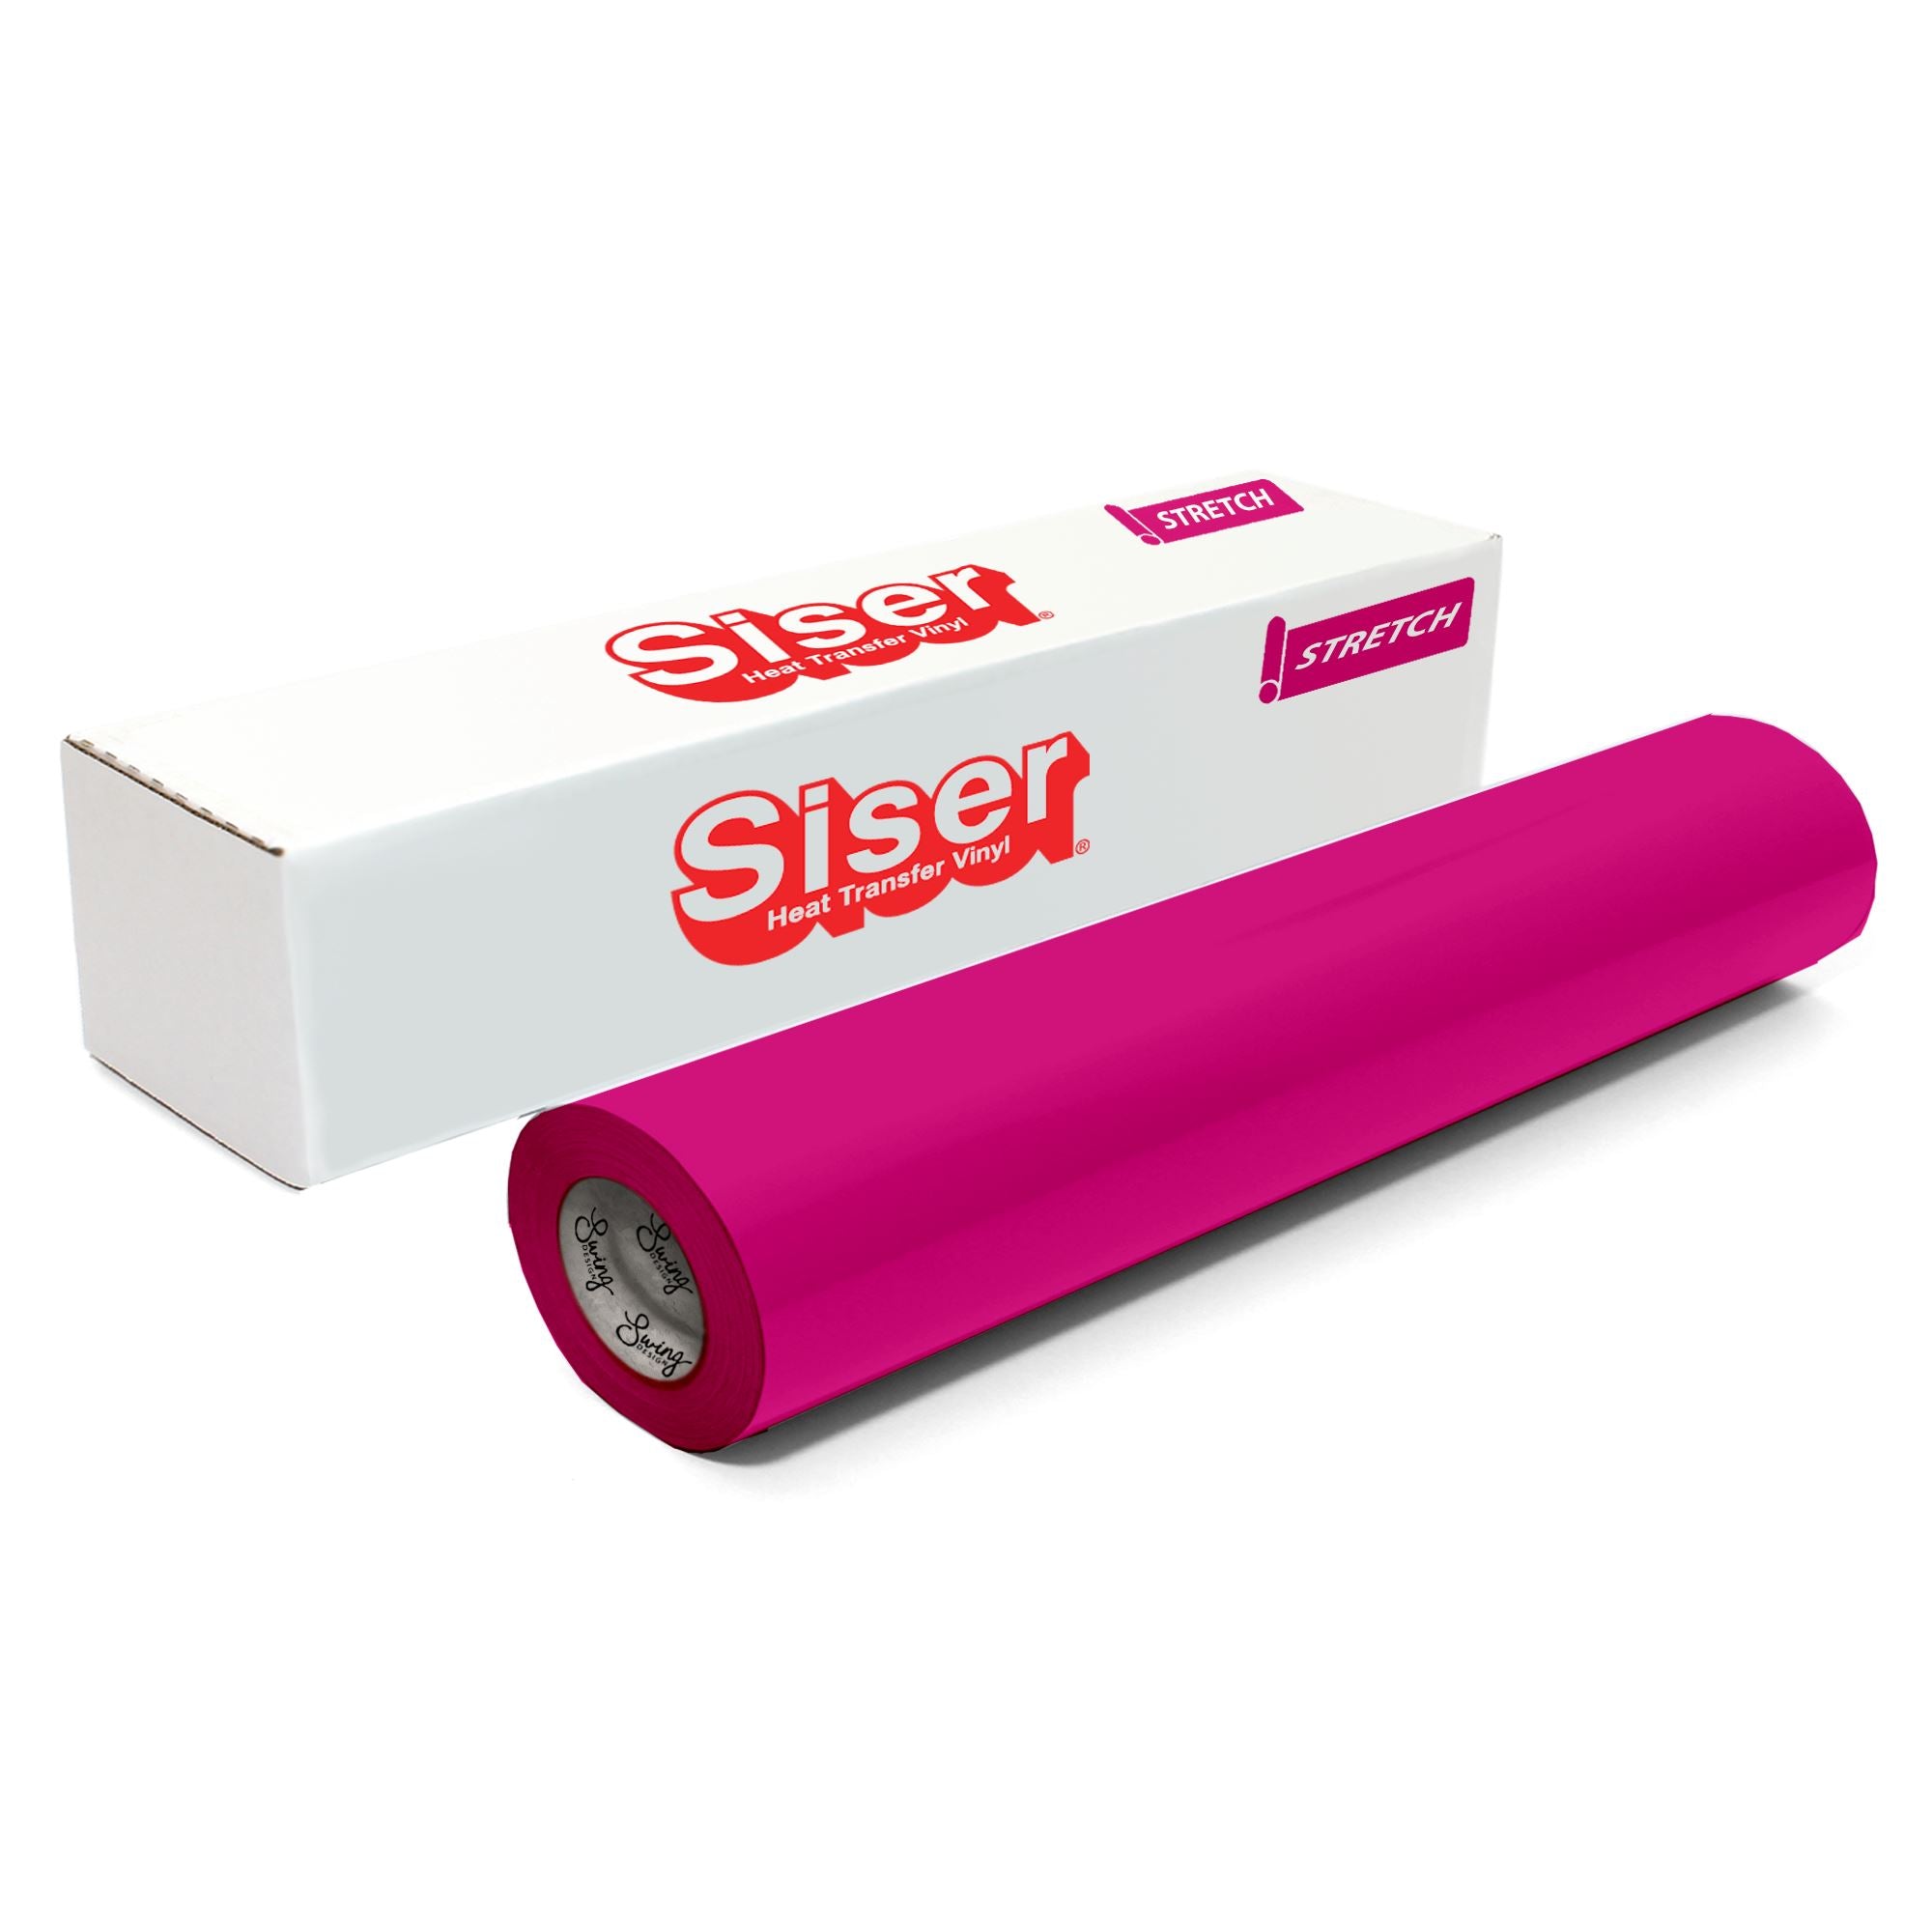 Siser EasyWeed Stretch Heat Transfer Vinyl (HTV) 15 in x 150 ft Roll - 20 Colors Available, Pink